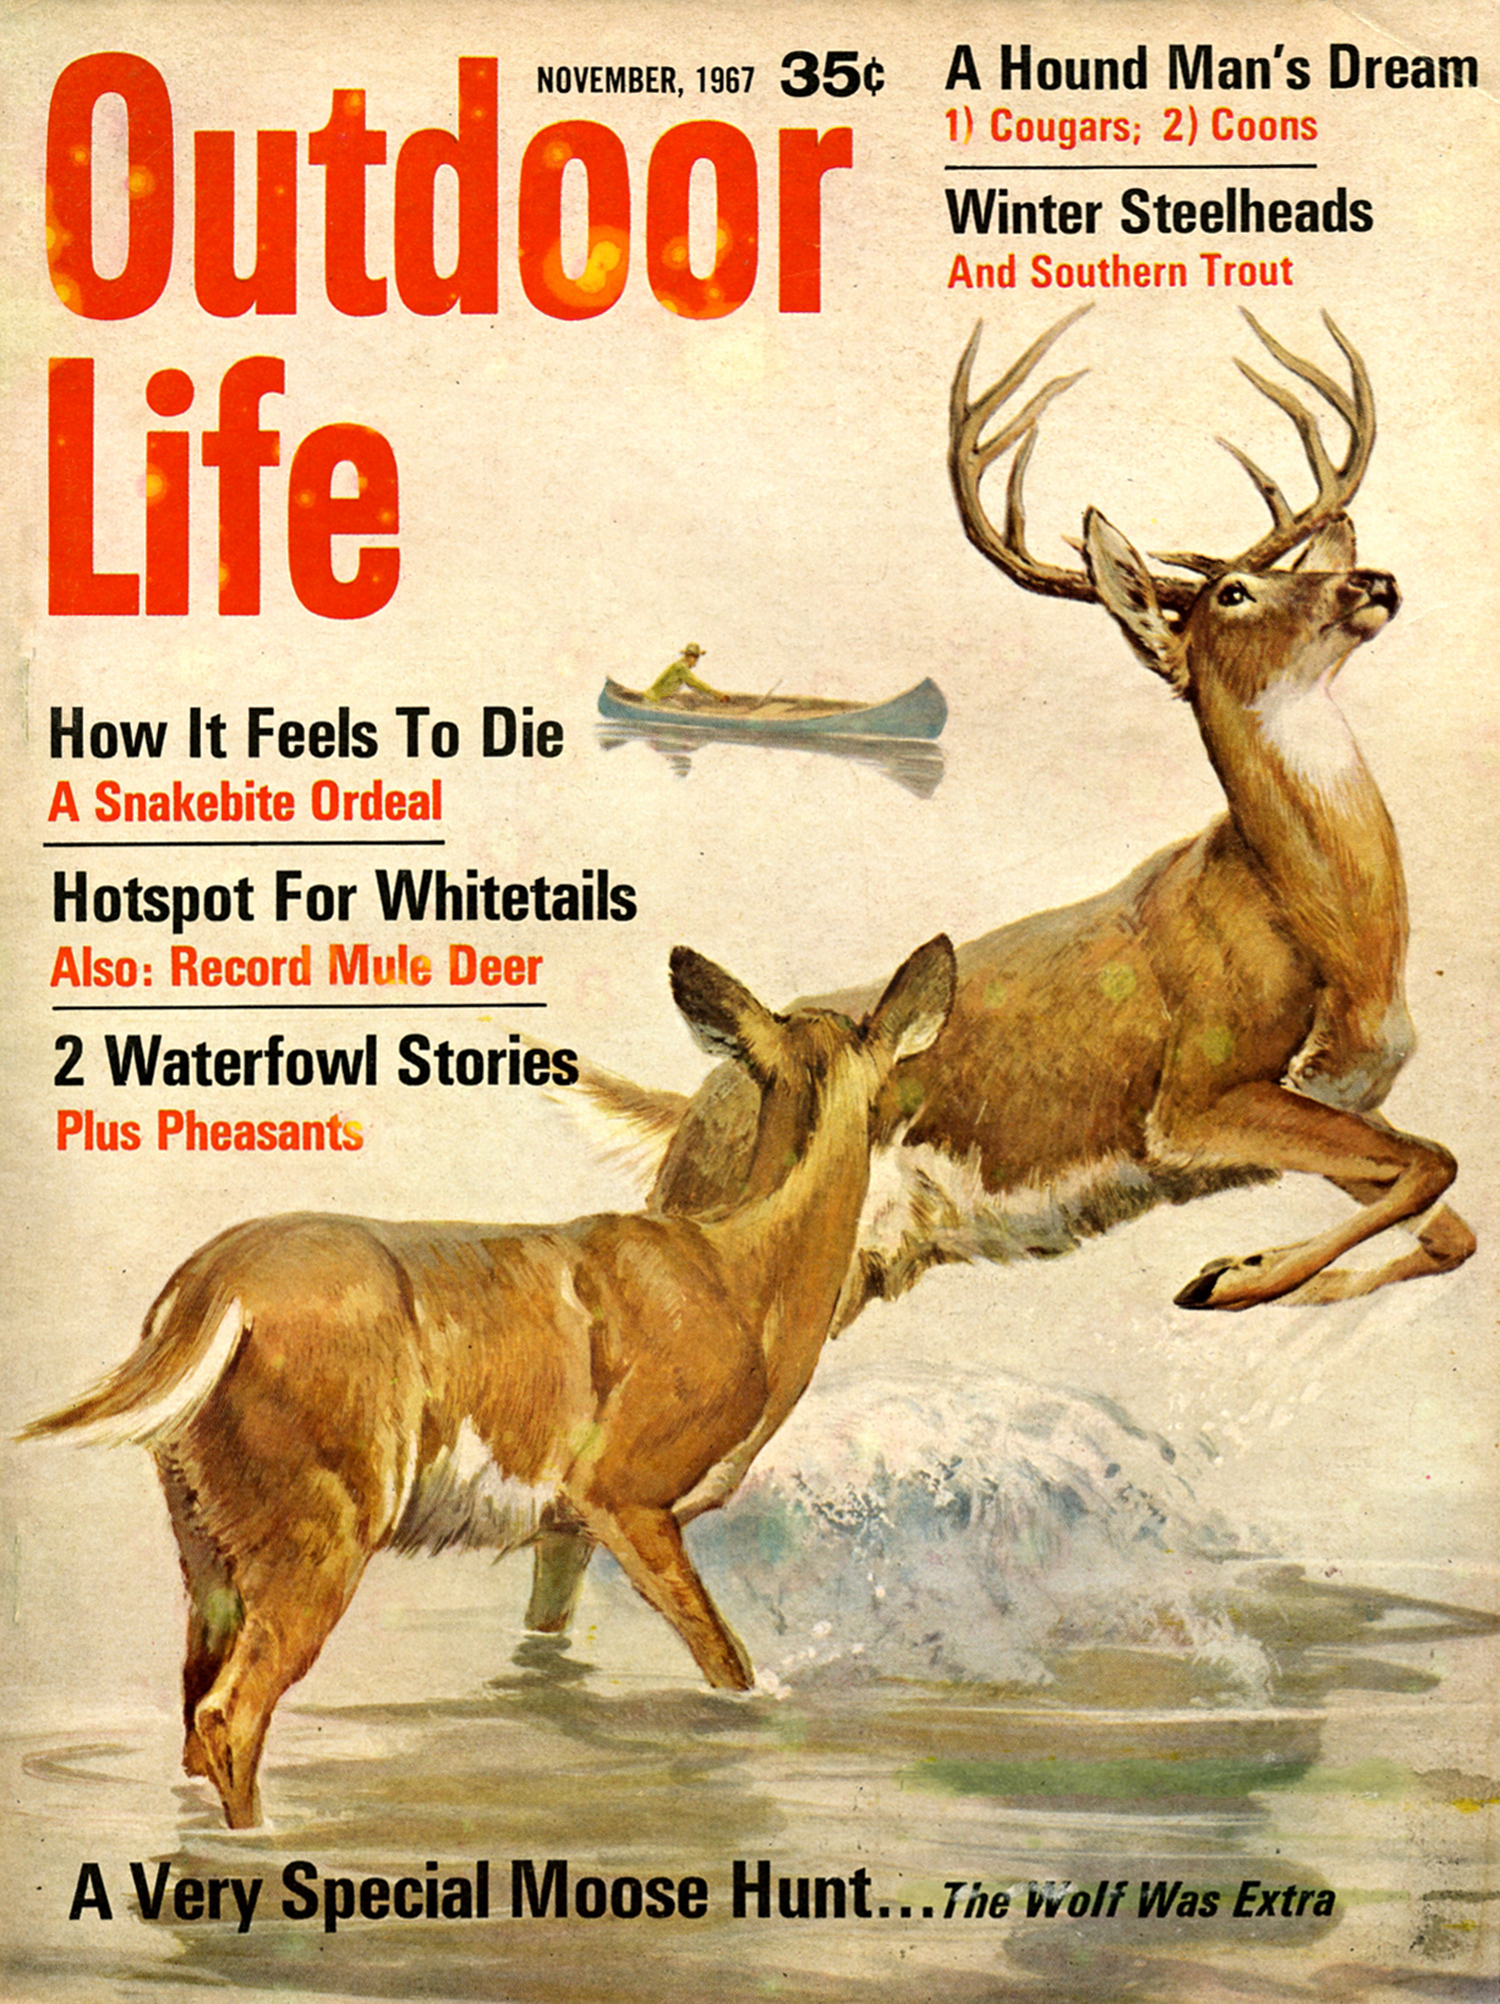 ­November 1967: If OL has an iconic cover scene, this is it—an illustration of a trophy critter with a hunter in the background.